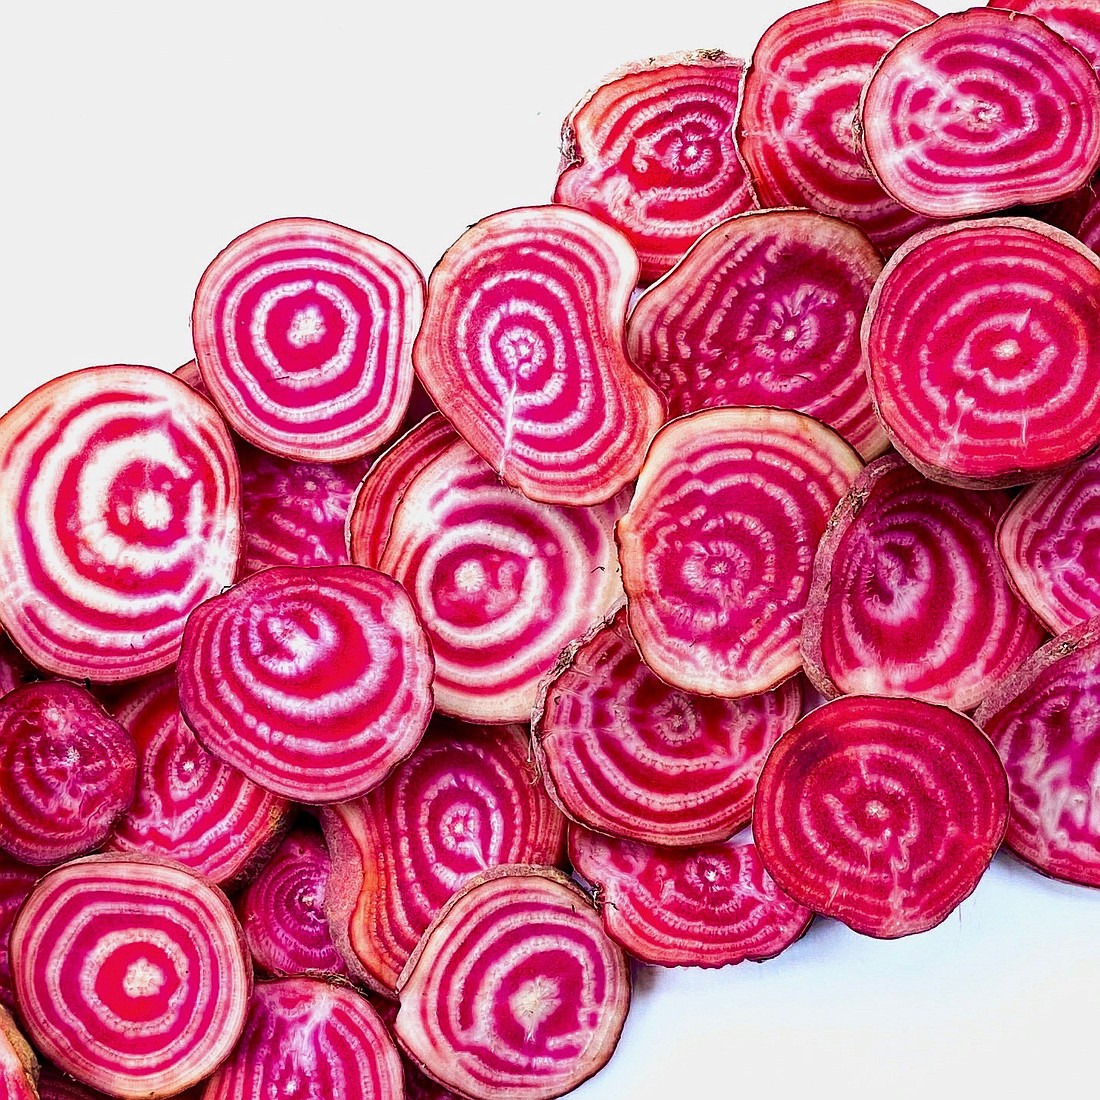 This month's root-to-leaf recipe showcases the stunning Chioggia beet, which has, improbably, concentric circles of pink and white flesh. Roasted whole, the beets become tender while retaining their colors.